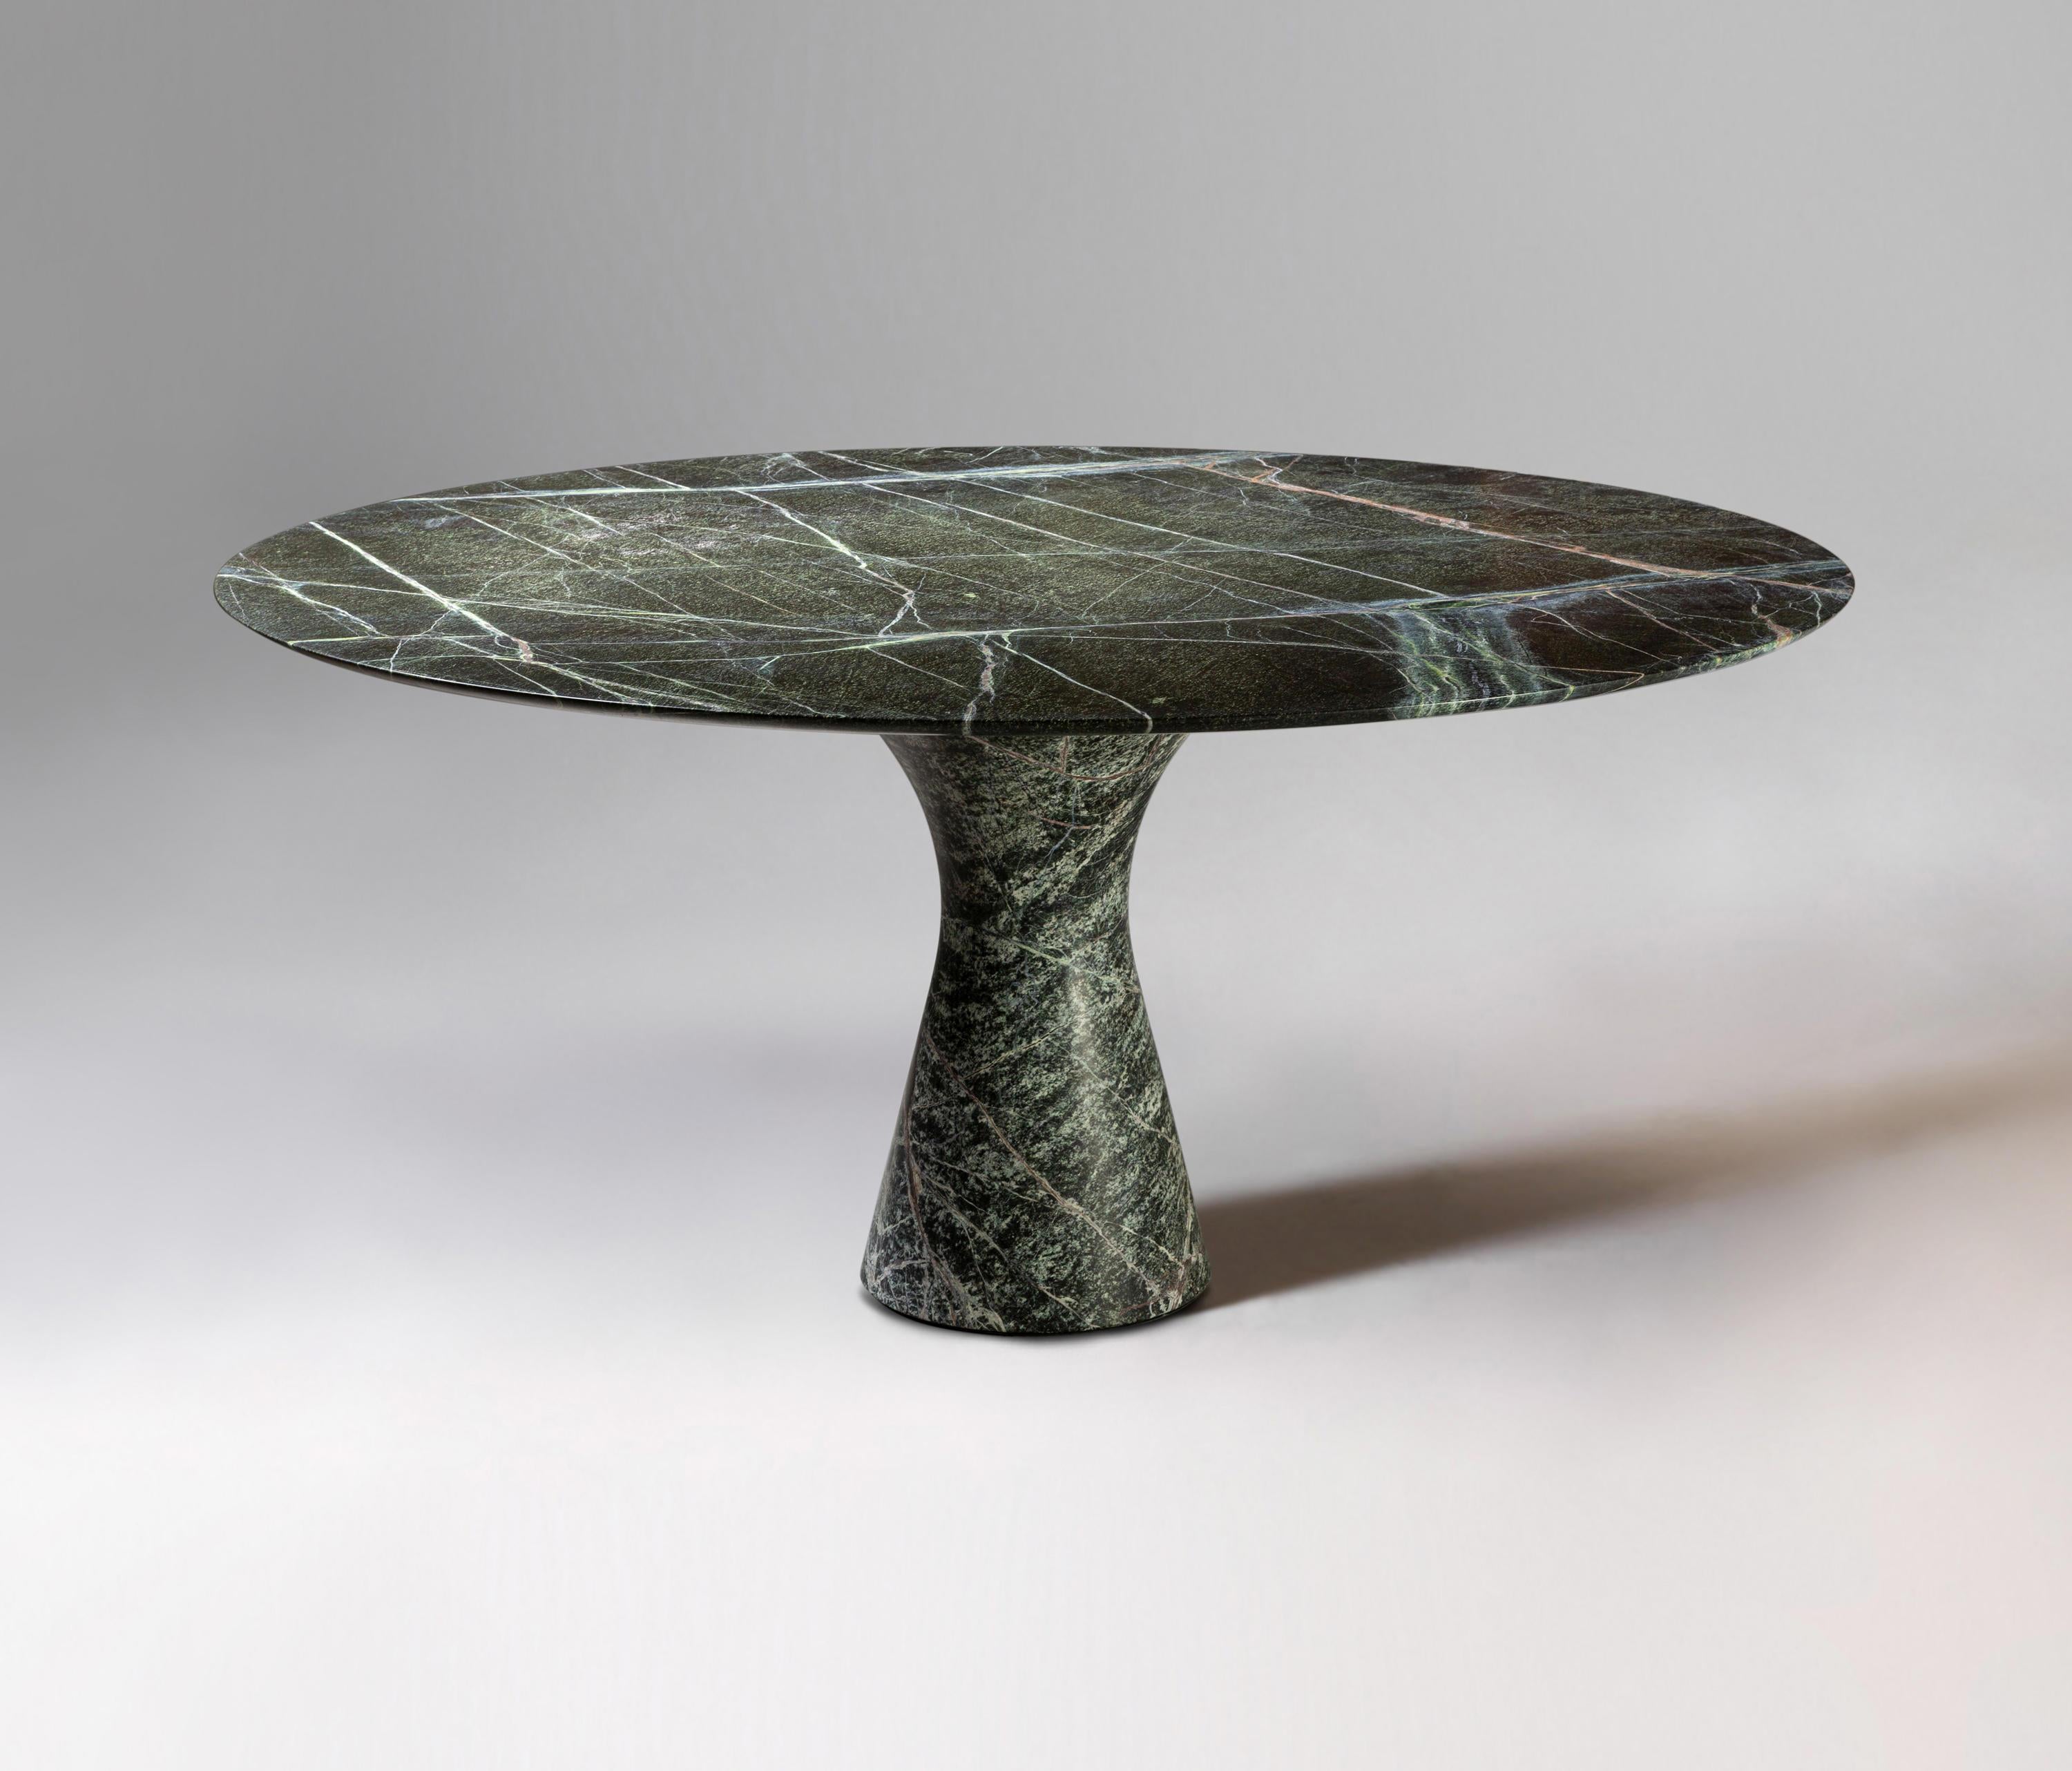 Grey Saint Laurent Refined Contemporary Marble Dining Table 160/75 For Sale 2